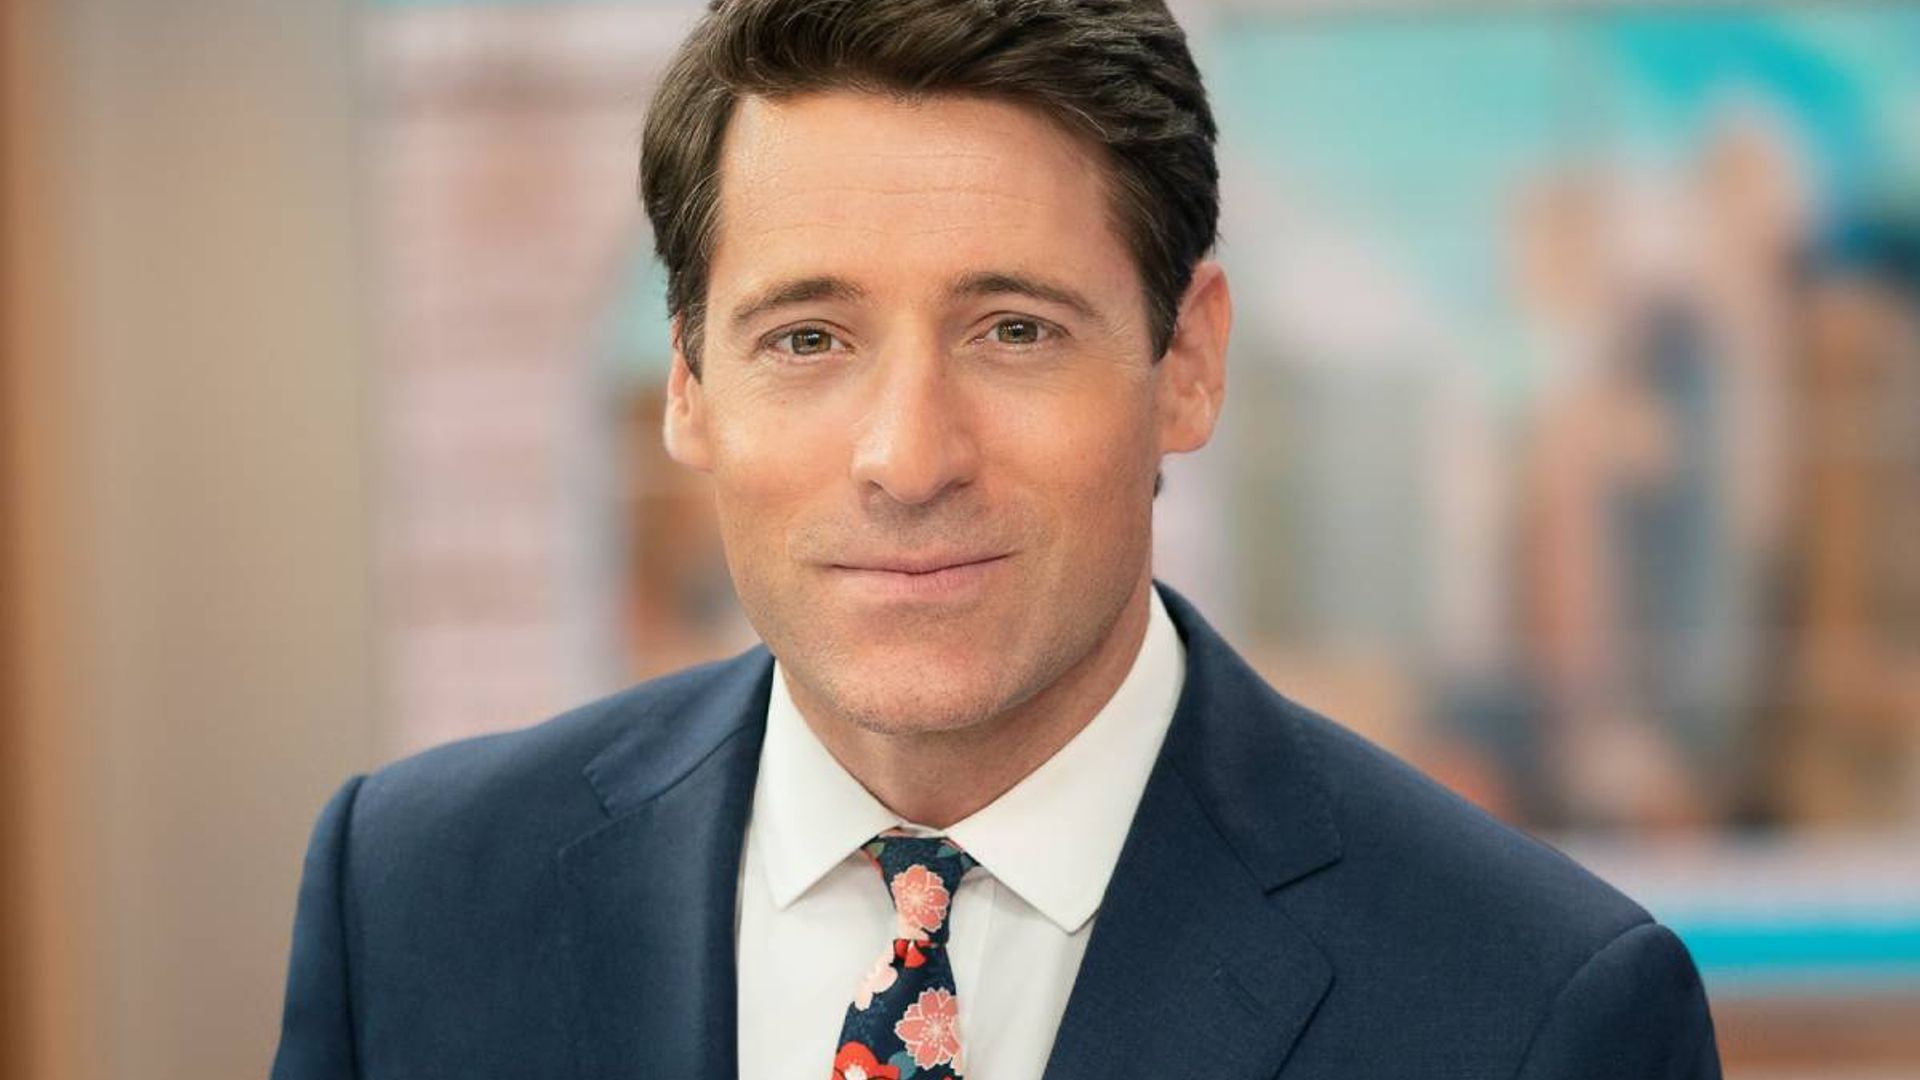 Exclusive: Tony Dokoupil talks exciting new role and working with CBS Mornings co-stars Gayle King and Nate Burleson